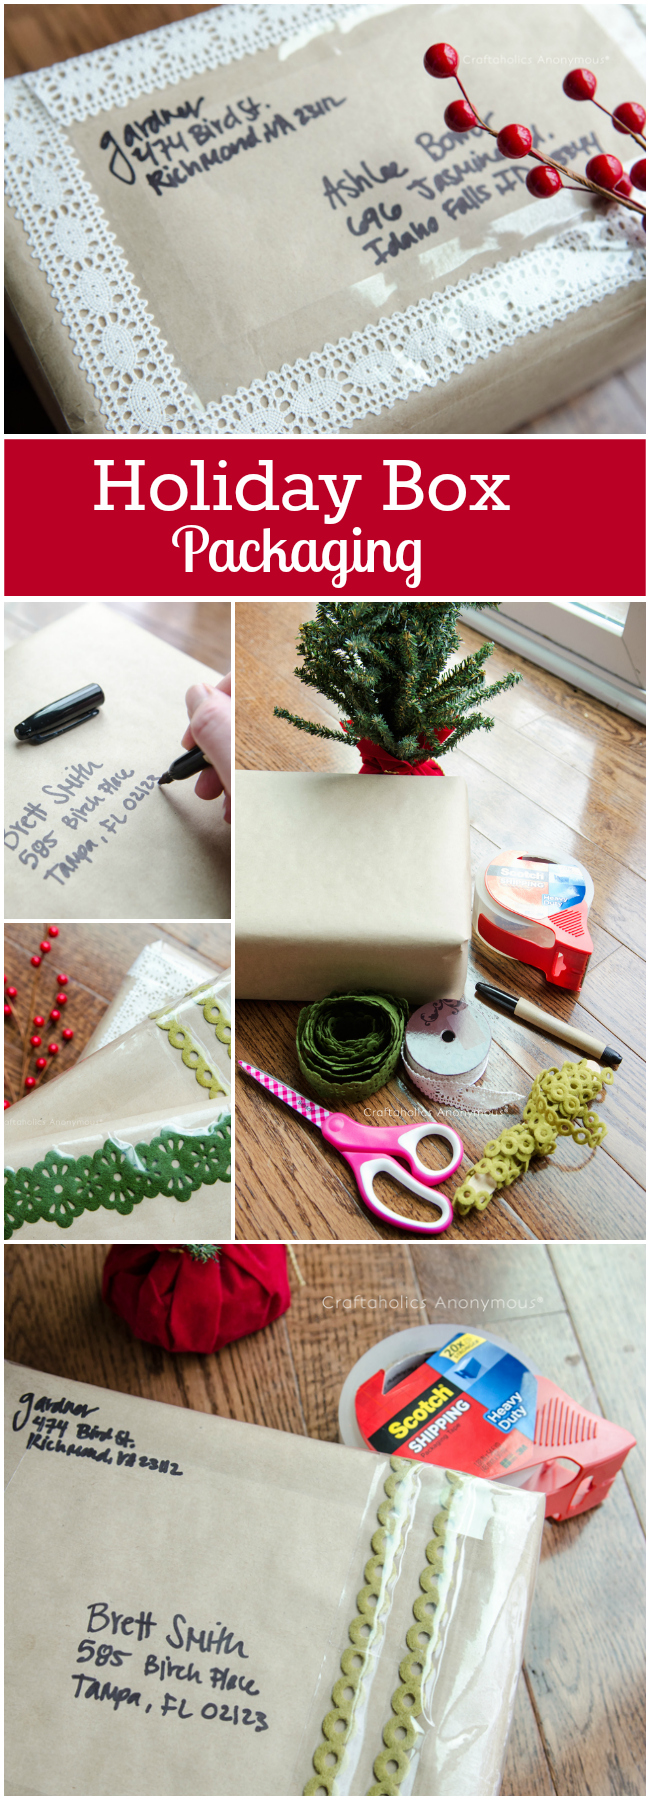 DIY Holiday box packaging ideas. Perfect for making gifts look festive even when being shipped!